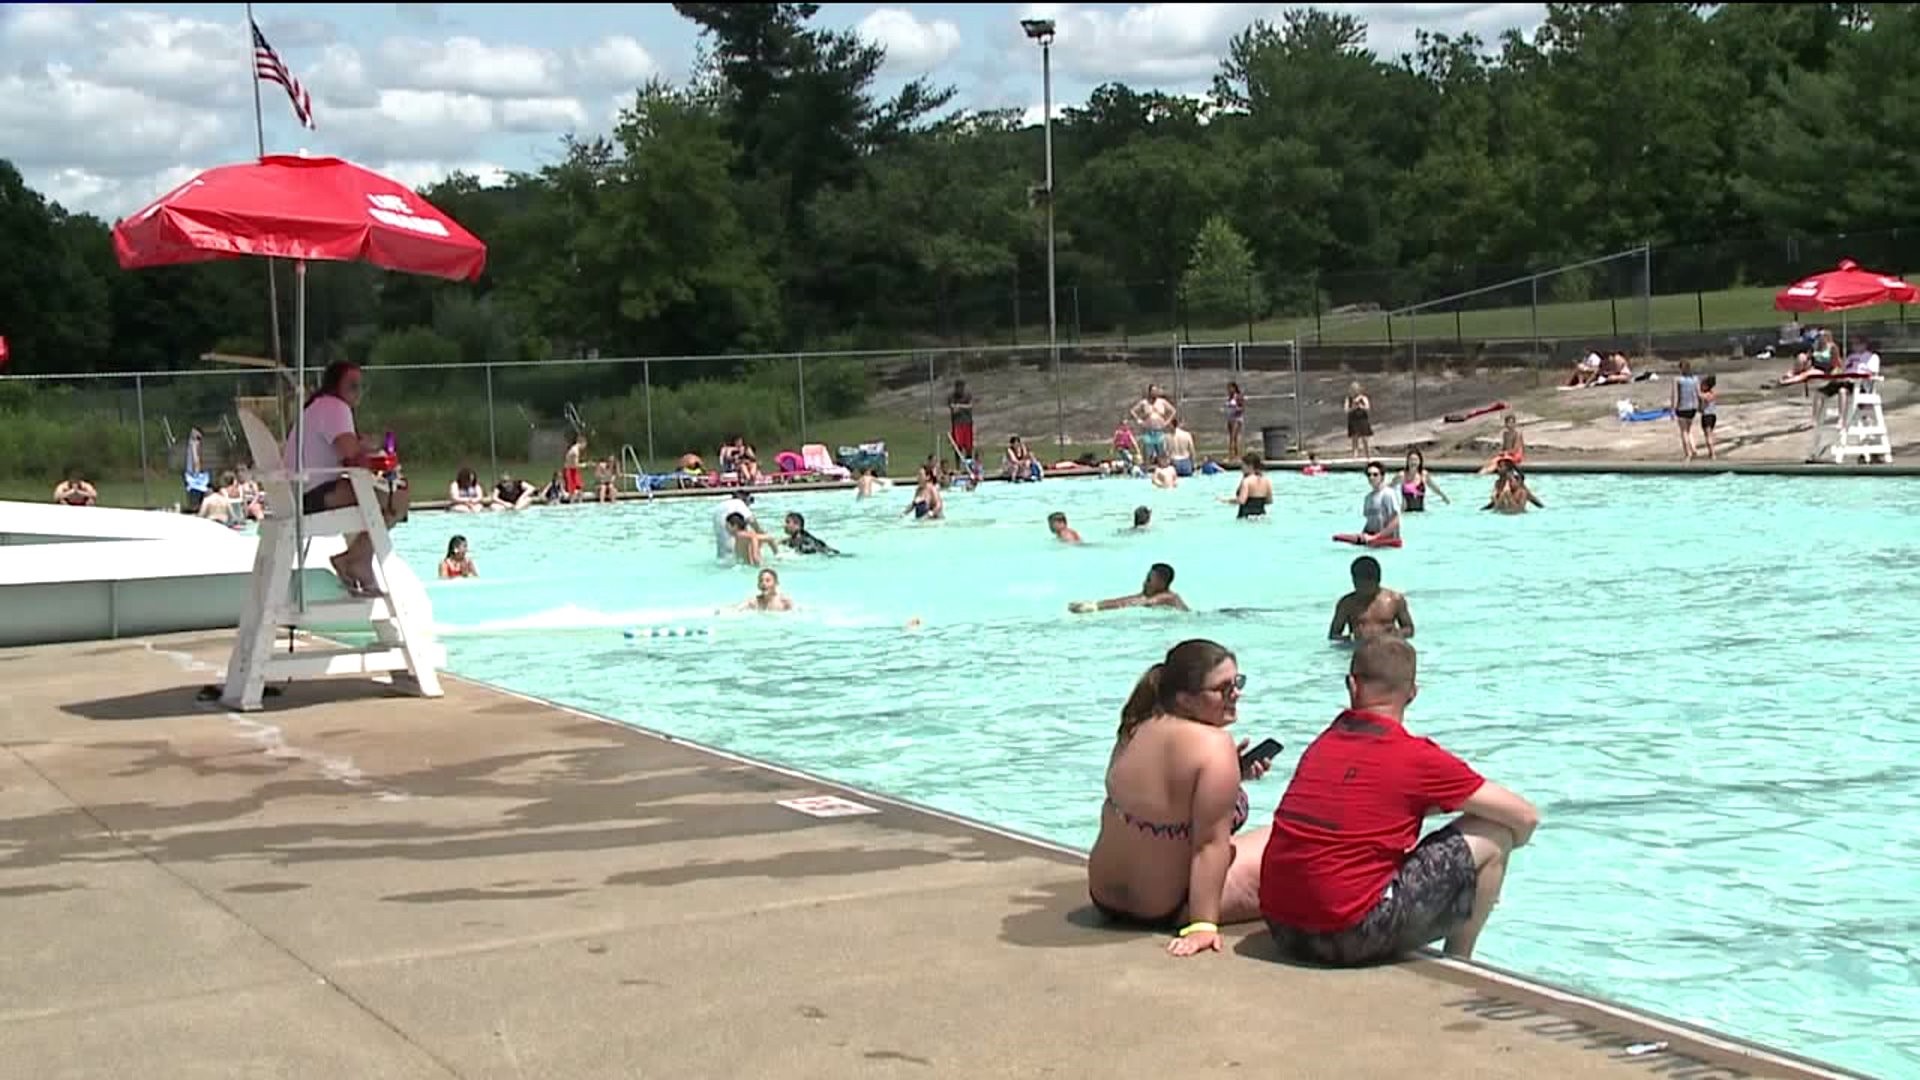 Opening Day at Nay Aug Park Pool